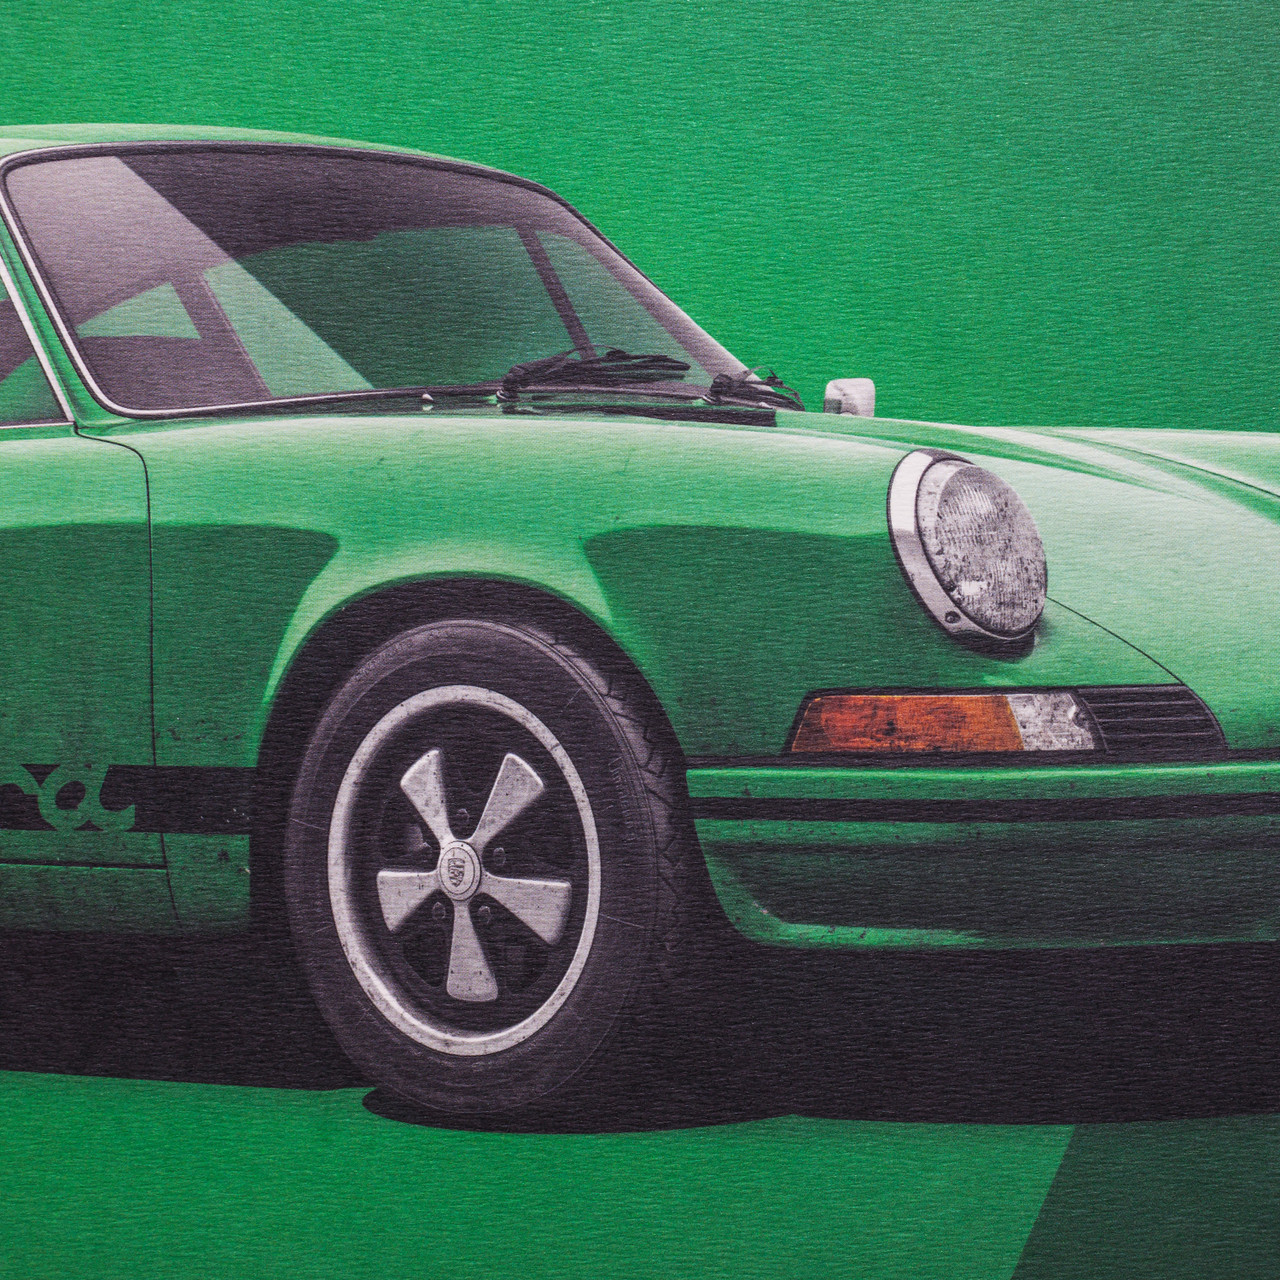 Special design indoor car cover fits Porsche 911 Urmodell 1963-1973 Green  with yellow striping